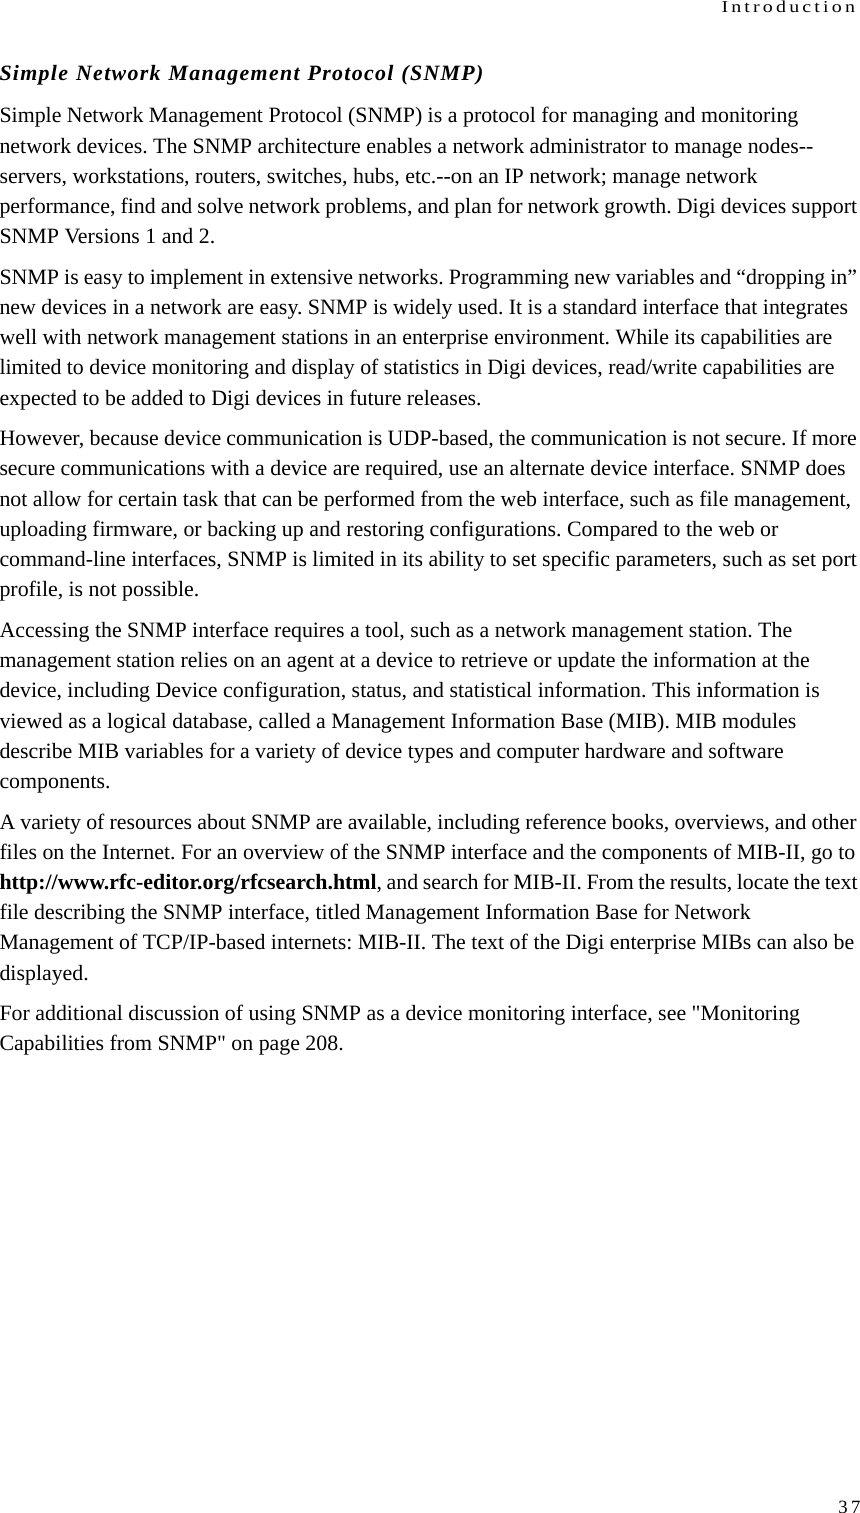 Introduction37Simple Network Management Protocol (SNMP)Simple Network Management Protocol (SNMP) is a protocol for managing and monitoring network devices. The SNMP architecture enables a network administrator to manage nodes--servers, workstations, routers, switches, hubs, etc.--on an IP network; manage network performance, find and solve network problems, and plan for network growth. Digi devices support SNMP Versions 1 and 2.SNMP is easy to implement in extensive networks. Programming new variables and “dropping in” new devices in a network are easy. SNMP is widely used. It is a standard interface that integrates well with network management stations in an enterprise environment. While its capabilities are limited to device monitoring and display of statistics in Digi devices, read/write capabilities are expected to be added to Digi devices in future releases.However, because device communication is UDP-based, the communication is not secure. If more secure communications with a device are required, use an alternate device interface. SNMP does not allow for certain task that can be performed from the web interface, such as file management, uploading firmware, or backing up and restoring configurations. Compared to the web or command-line interfaces, SNMP is limited in its ability to set specific parameters, such as set port profile, is not possible.Accessing the SNMP interface requires a tool, such as a network management station. The management station relies on an agent at a device to retrieve or update the information at the device, including Device configuration, status, and statistical information. This information is viewed as a logical database, called a Management Information Base (MIB). MIB modules describe MIB variables for a variety of device types and computer hardware and software components. A variety of resources about SNMP are available, including reference books, overviews, and other files on the Internet. For an overview of the SNMP interface and the components of MIB-II, go to http://www.rfc-editor.org/rfcsearch.html, and search for MIB-II. From the results, locate the text file describing the SNMP interface, titled Management Information Base for Network Management of TCP/IP-based internets: MIB-II. The text of the Digi enterprise MIBs can also be displayed.For additional discussion of using SNMP as a device monitoring interface, see &quot;Monitoring Capabilities from SNMP&quot; on page 208.